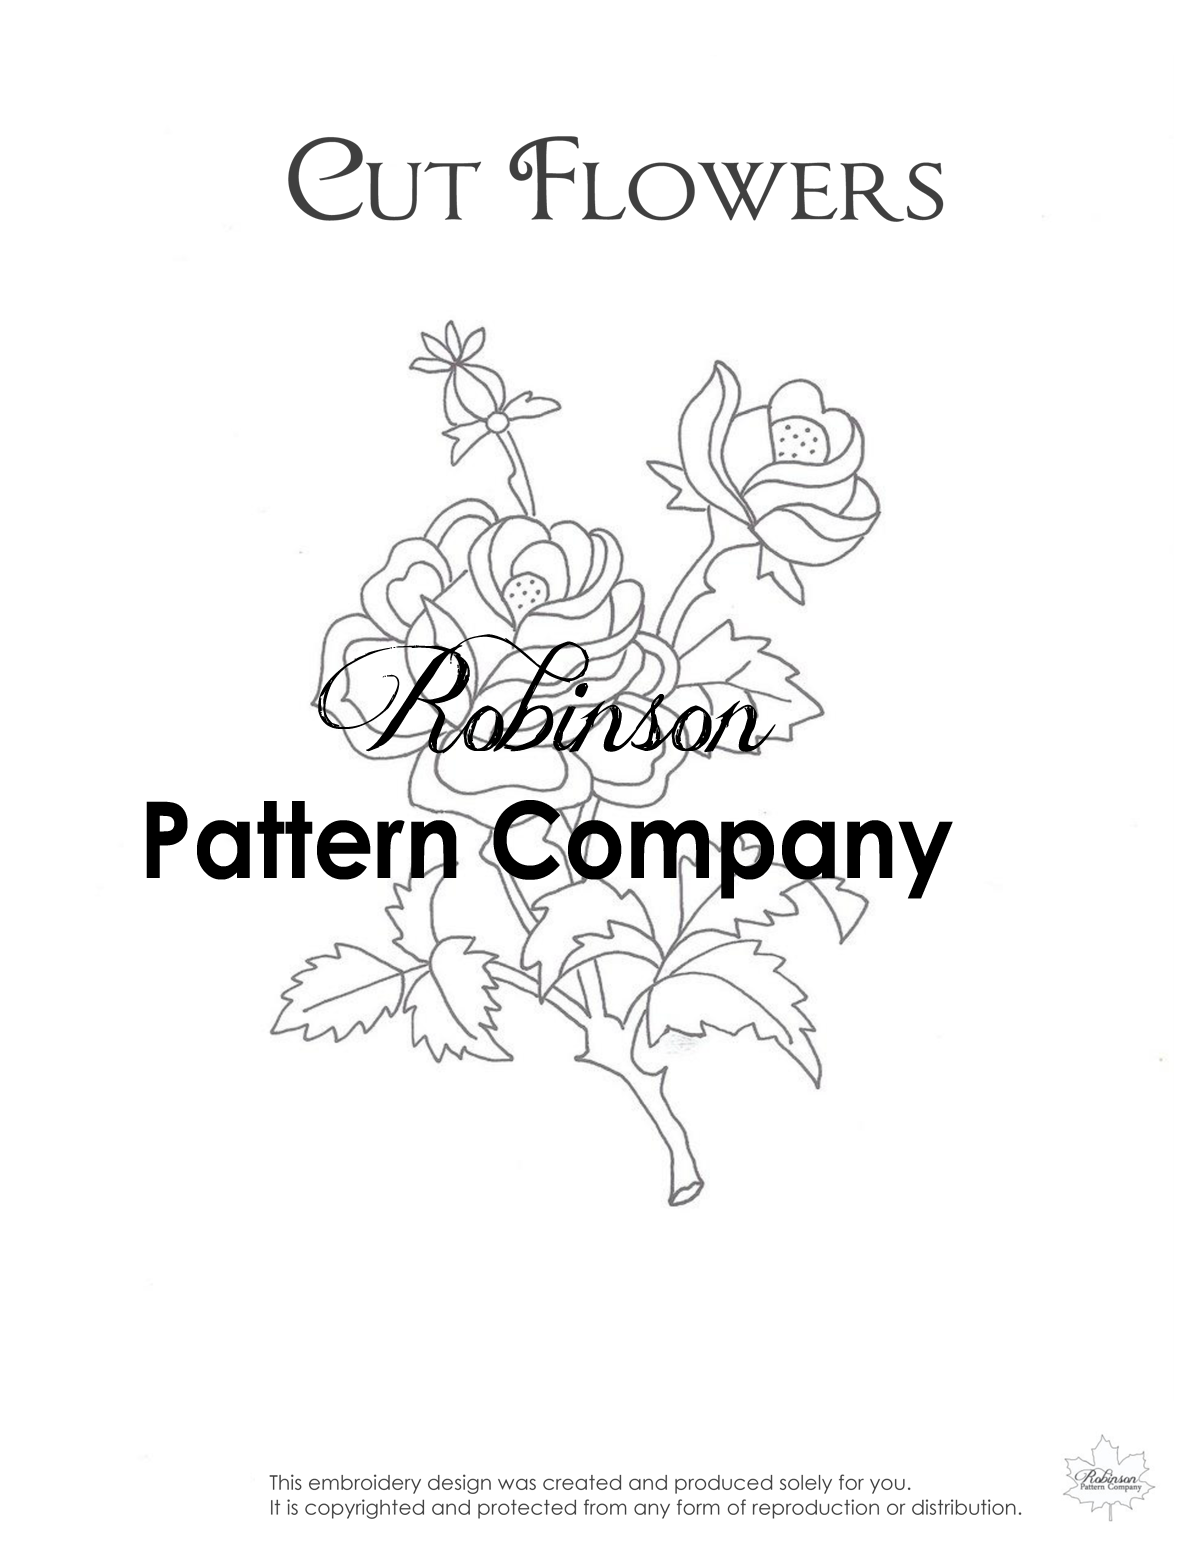 Cut Flowers Hand Embroidery pattern